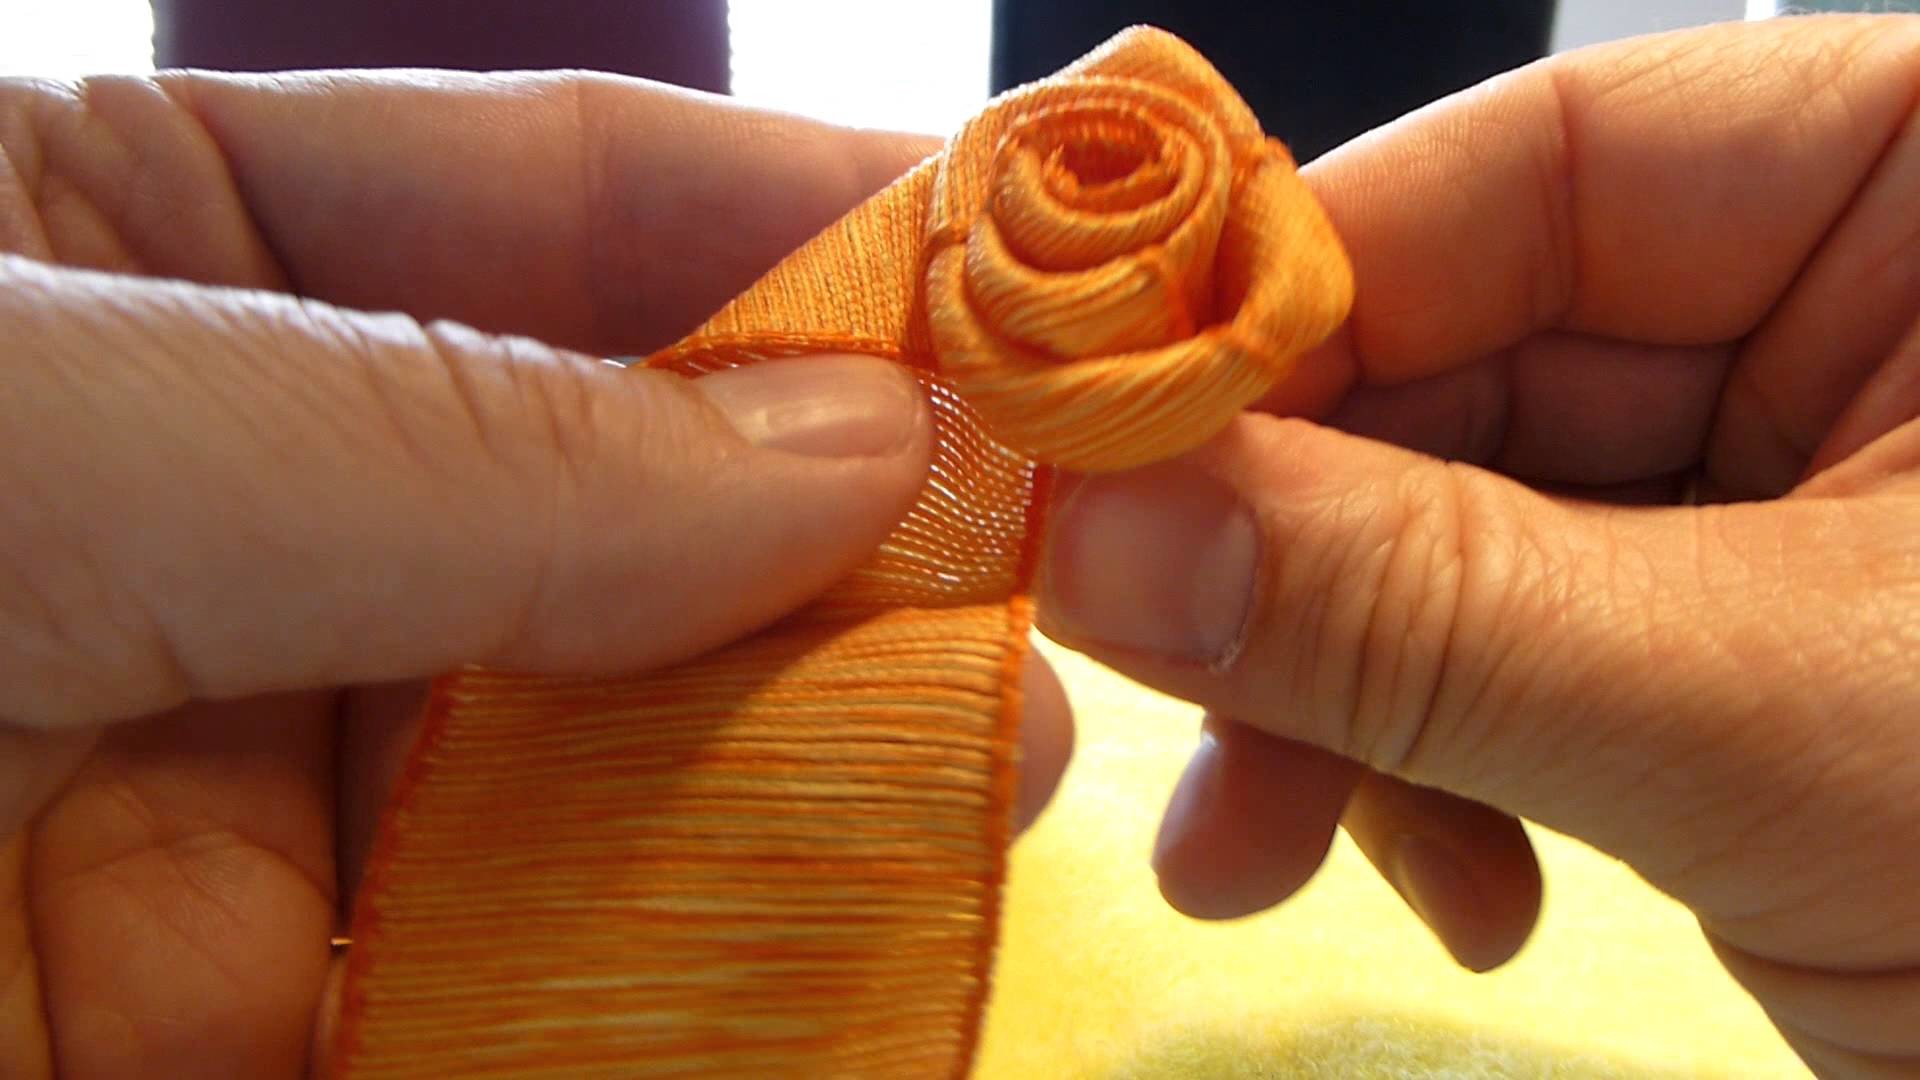 Einfache Rose selber binden, do it yourself ribbon rose